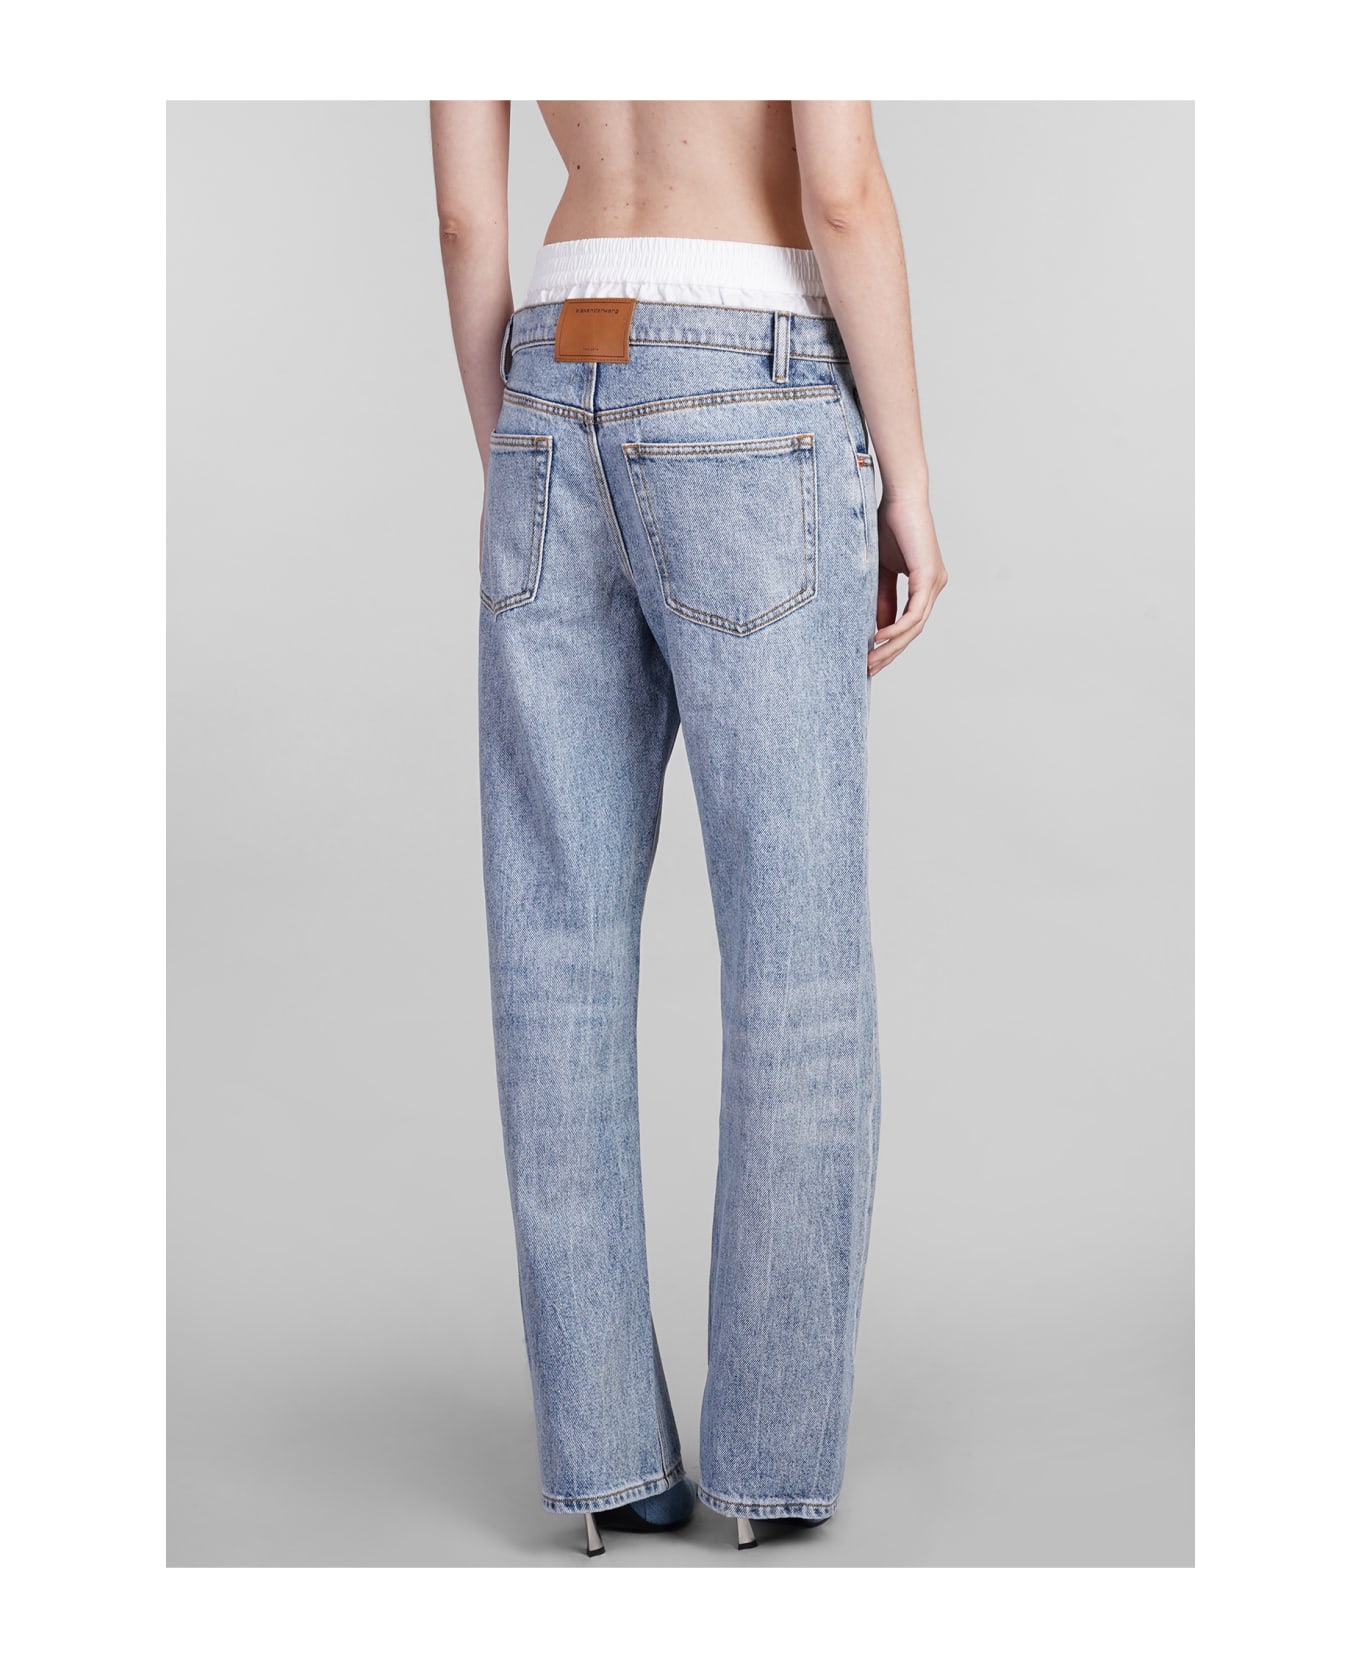 Alexander Wang Jeans In Blue Cotton | italist